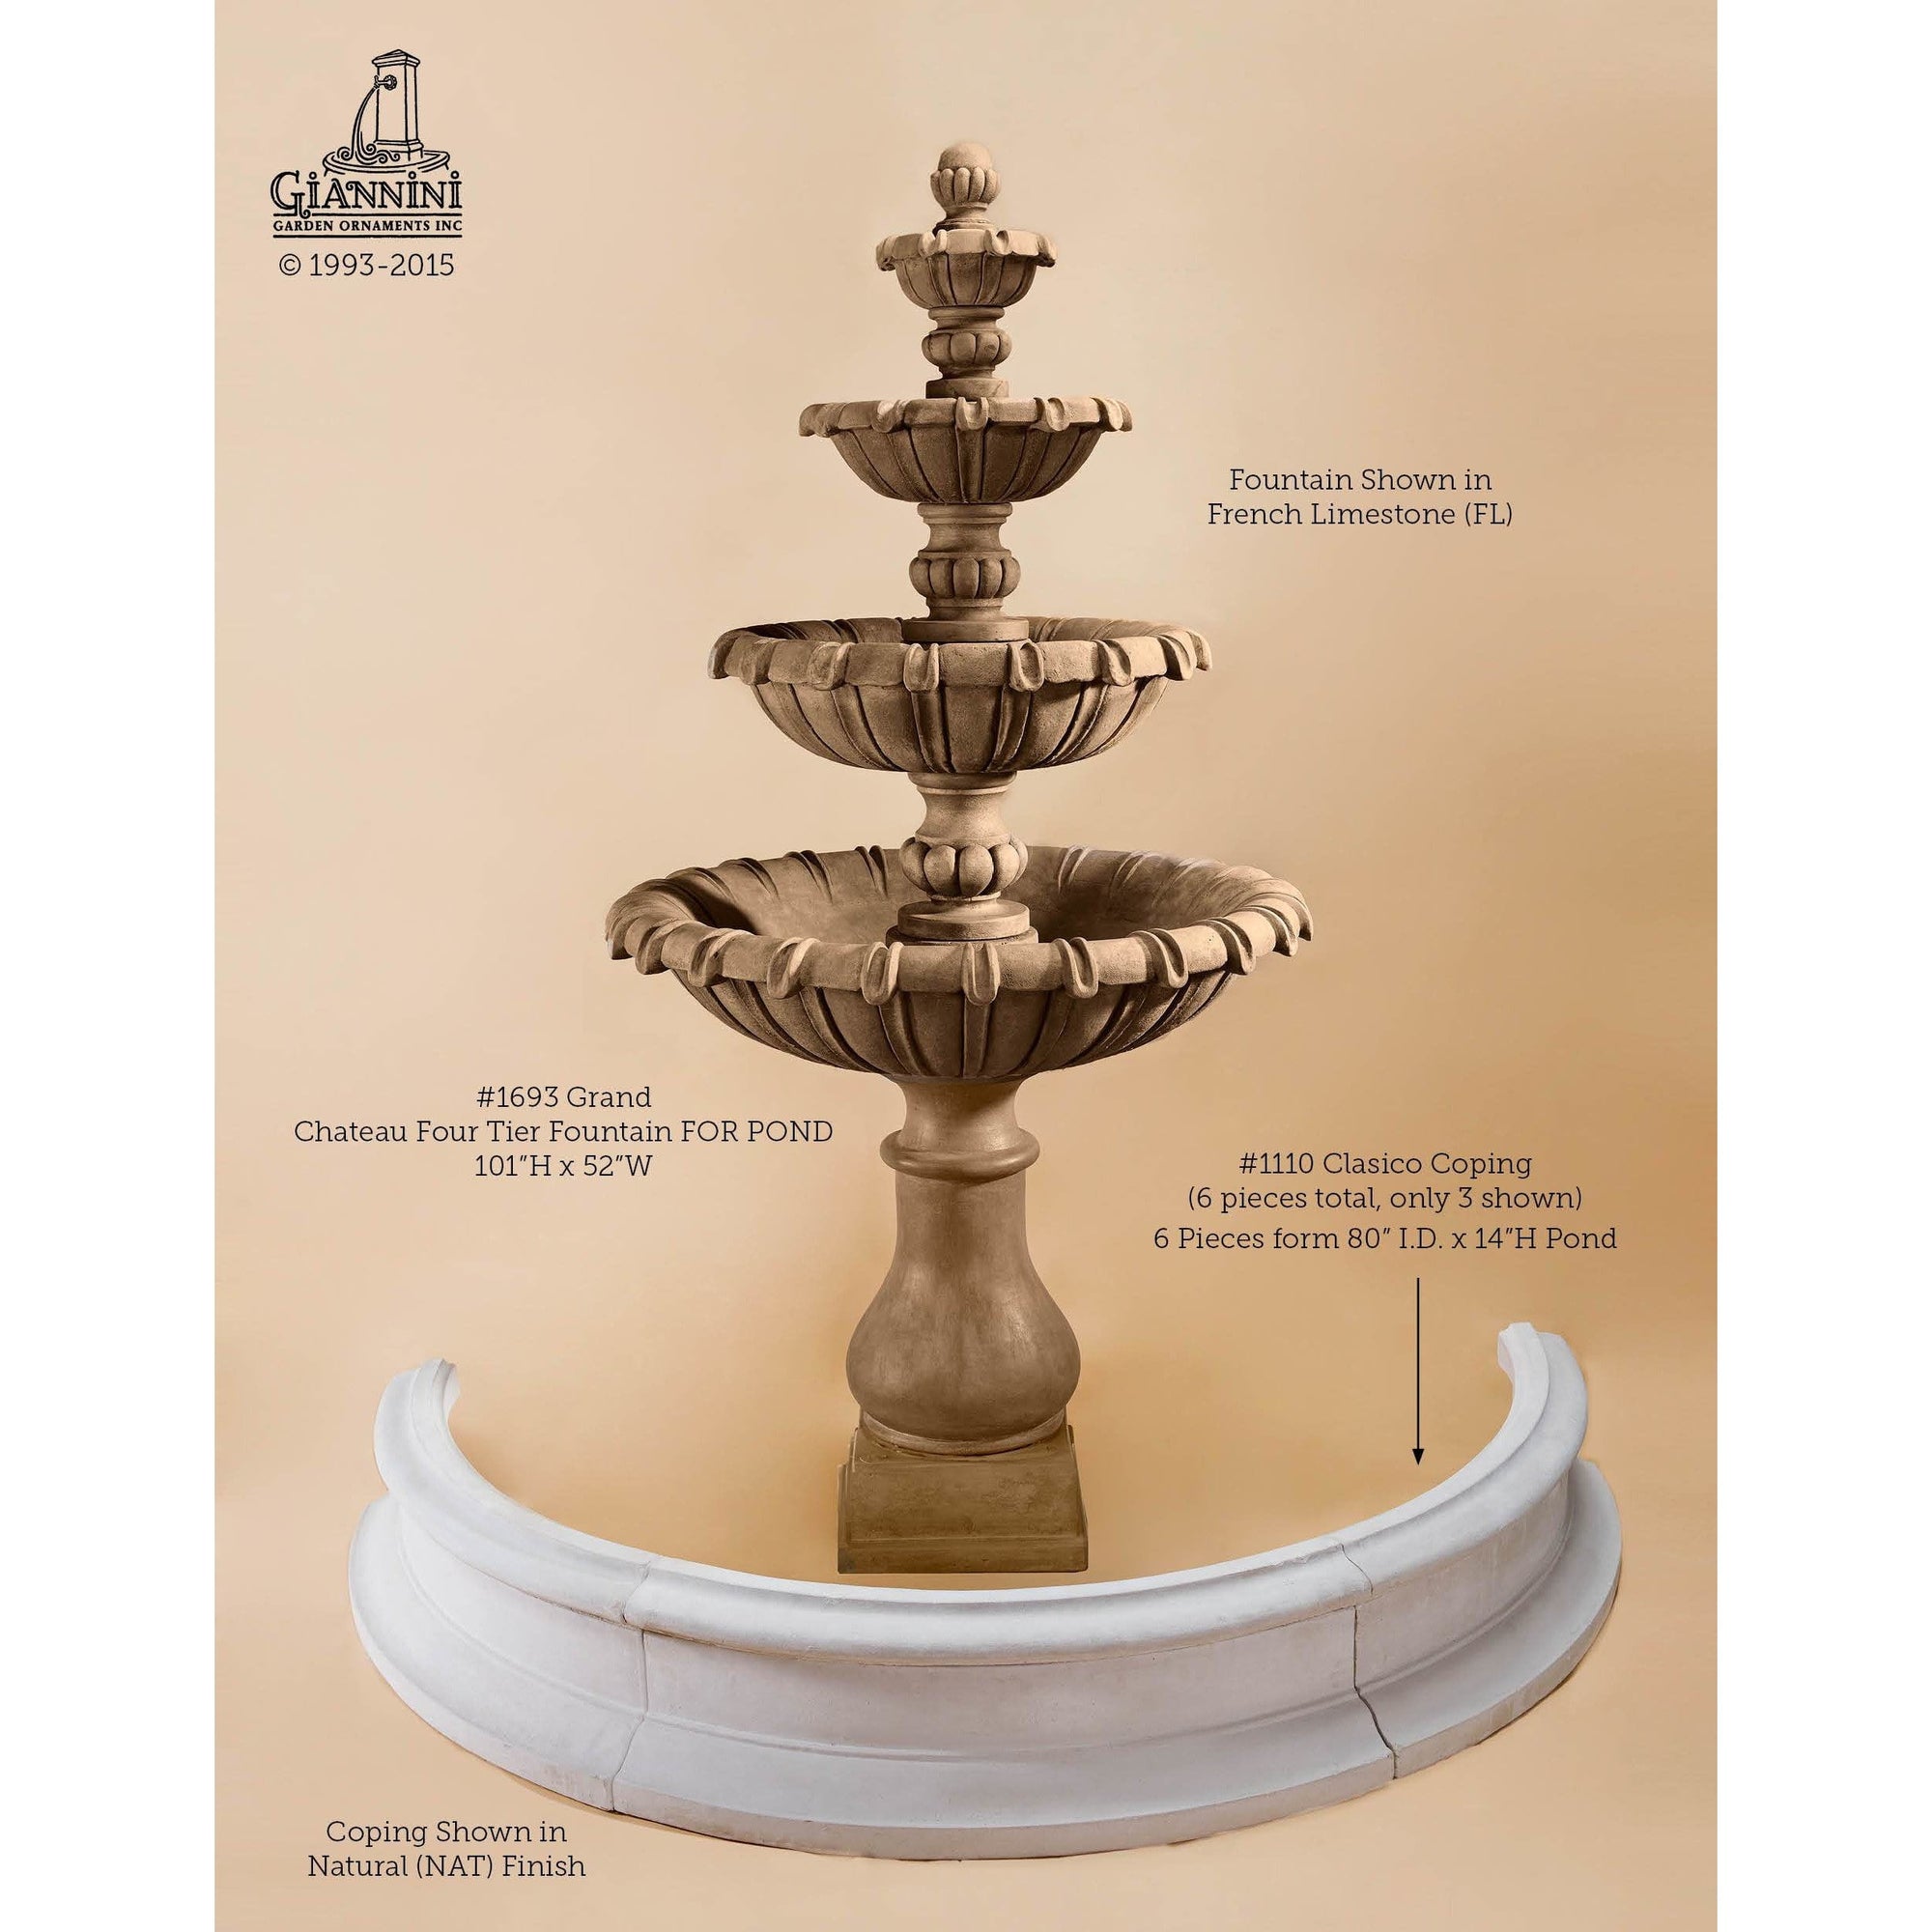 Giannini Garden Grand Chateau Concrete 4 Tier with Basin - Outdoor Courtyard Fountain- 1693 - Majestic Fountains